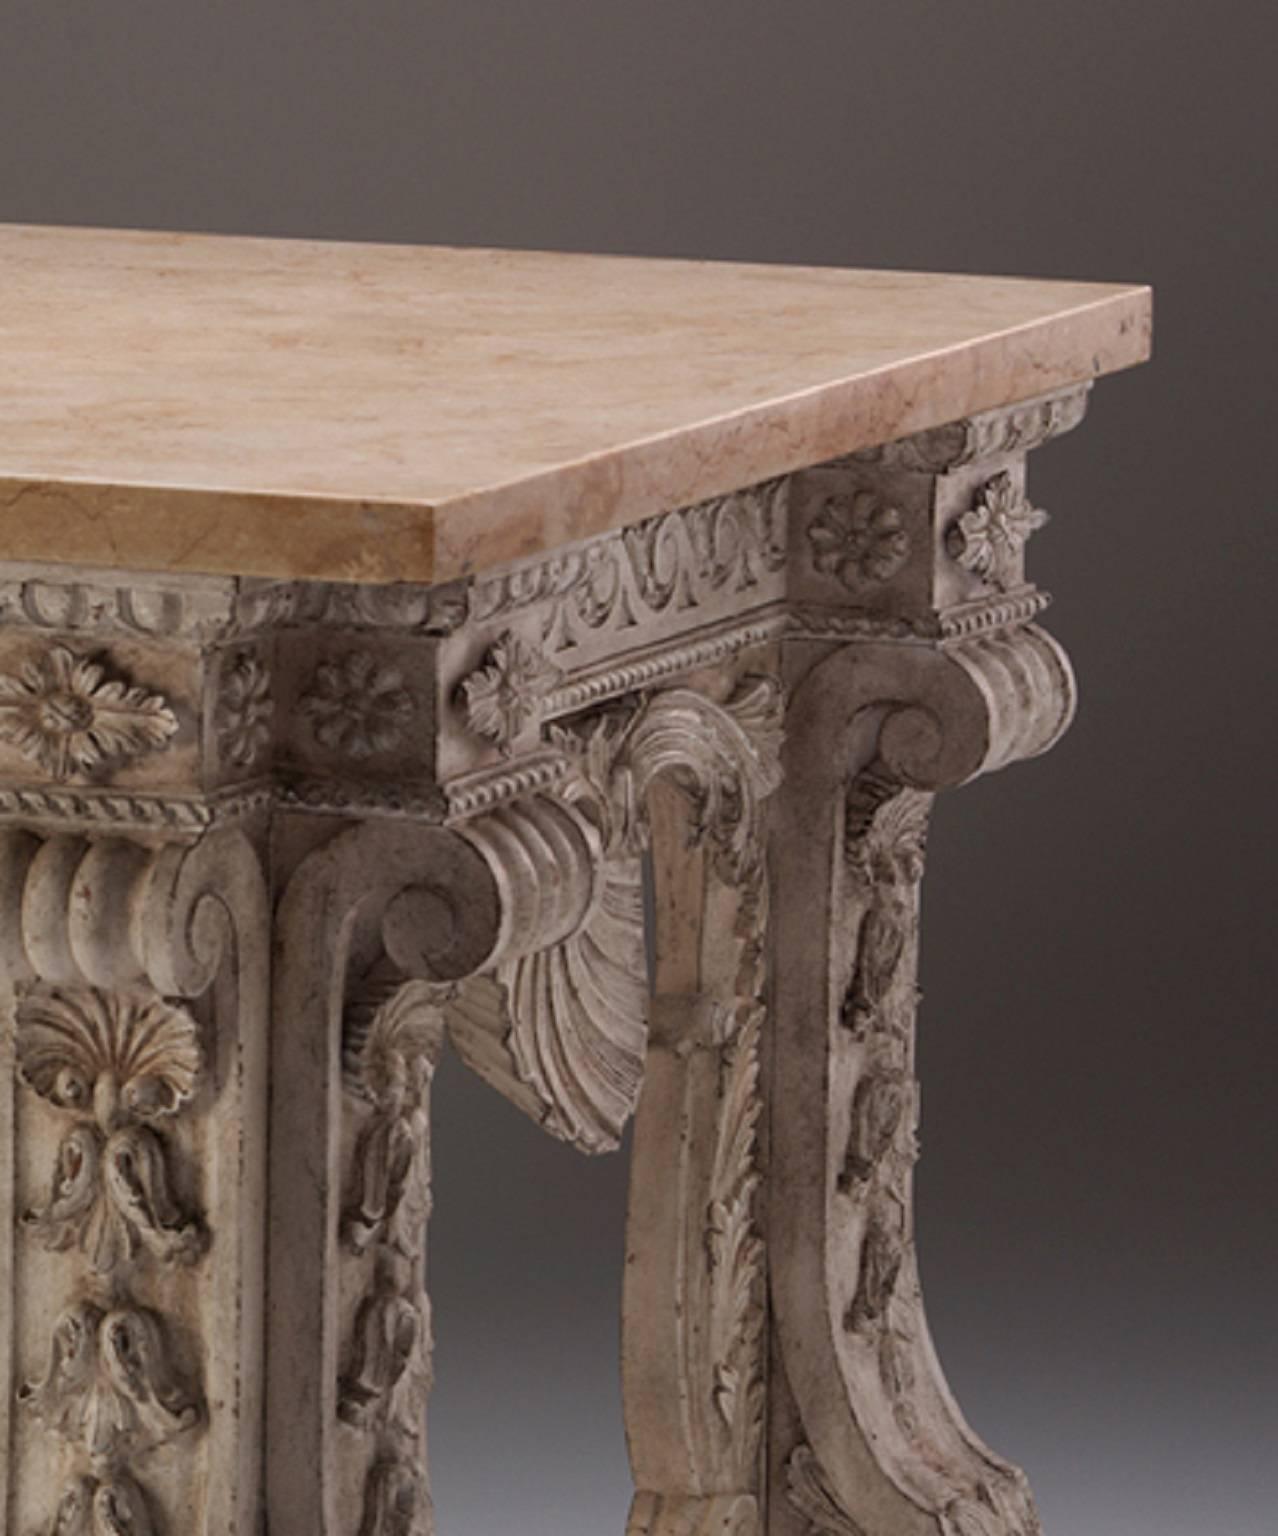 An important architectural side table after a design by Matthias Lock, the Hercules mask draped with the pelt of the Nemean lion hung through carved rings, with an architectural design carved and decorated framework, under a vitruvian scroll frieze